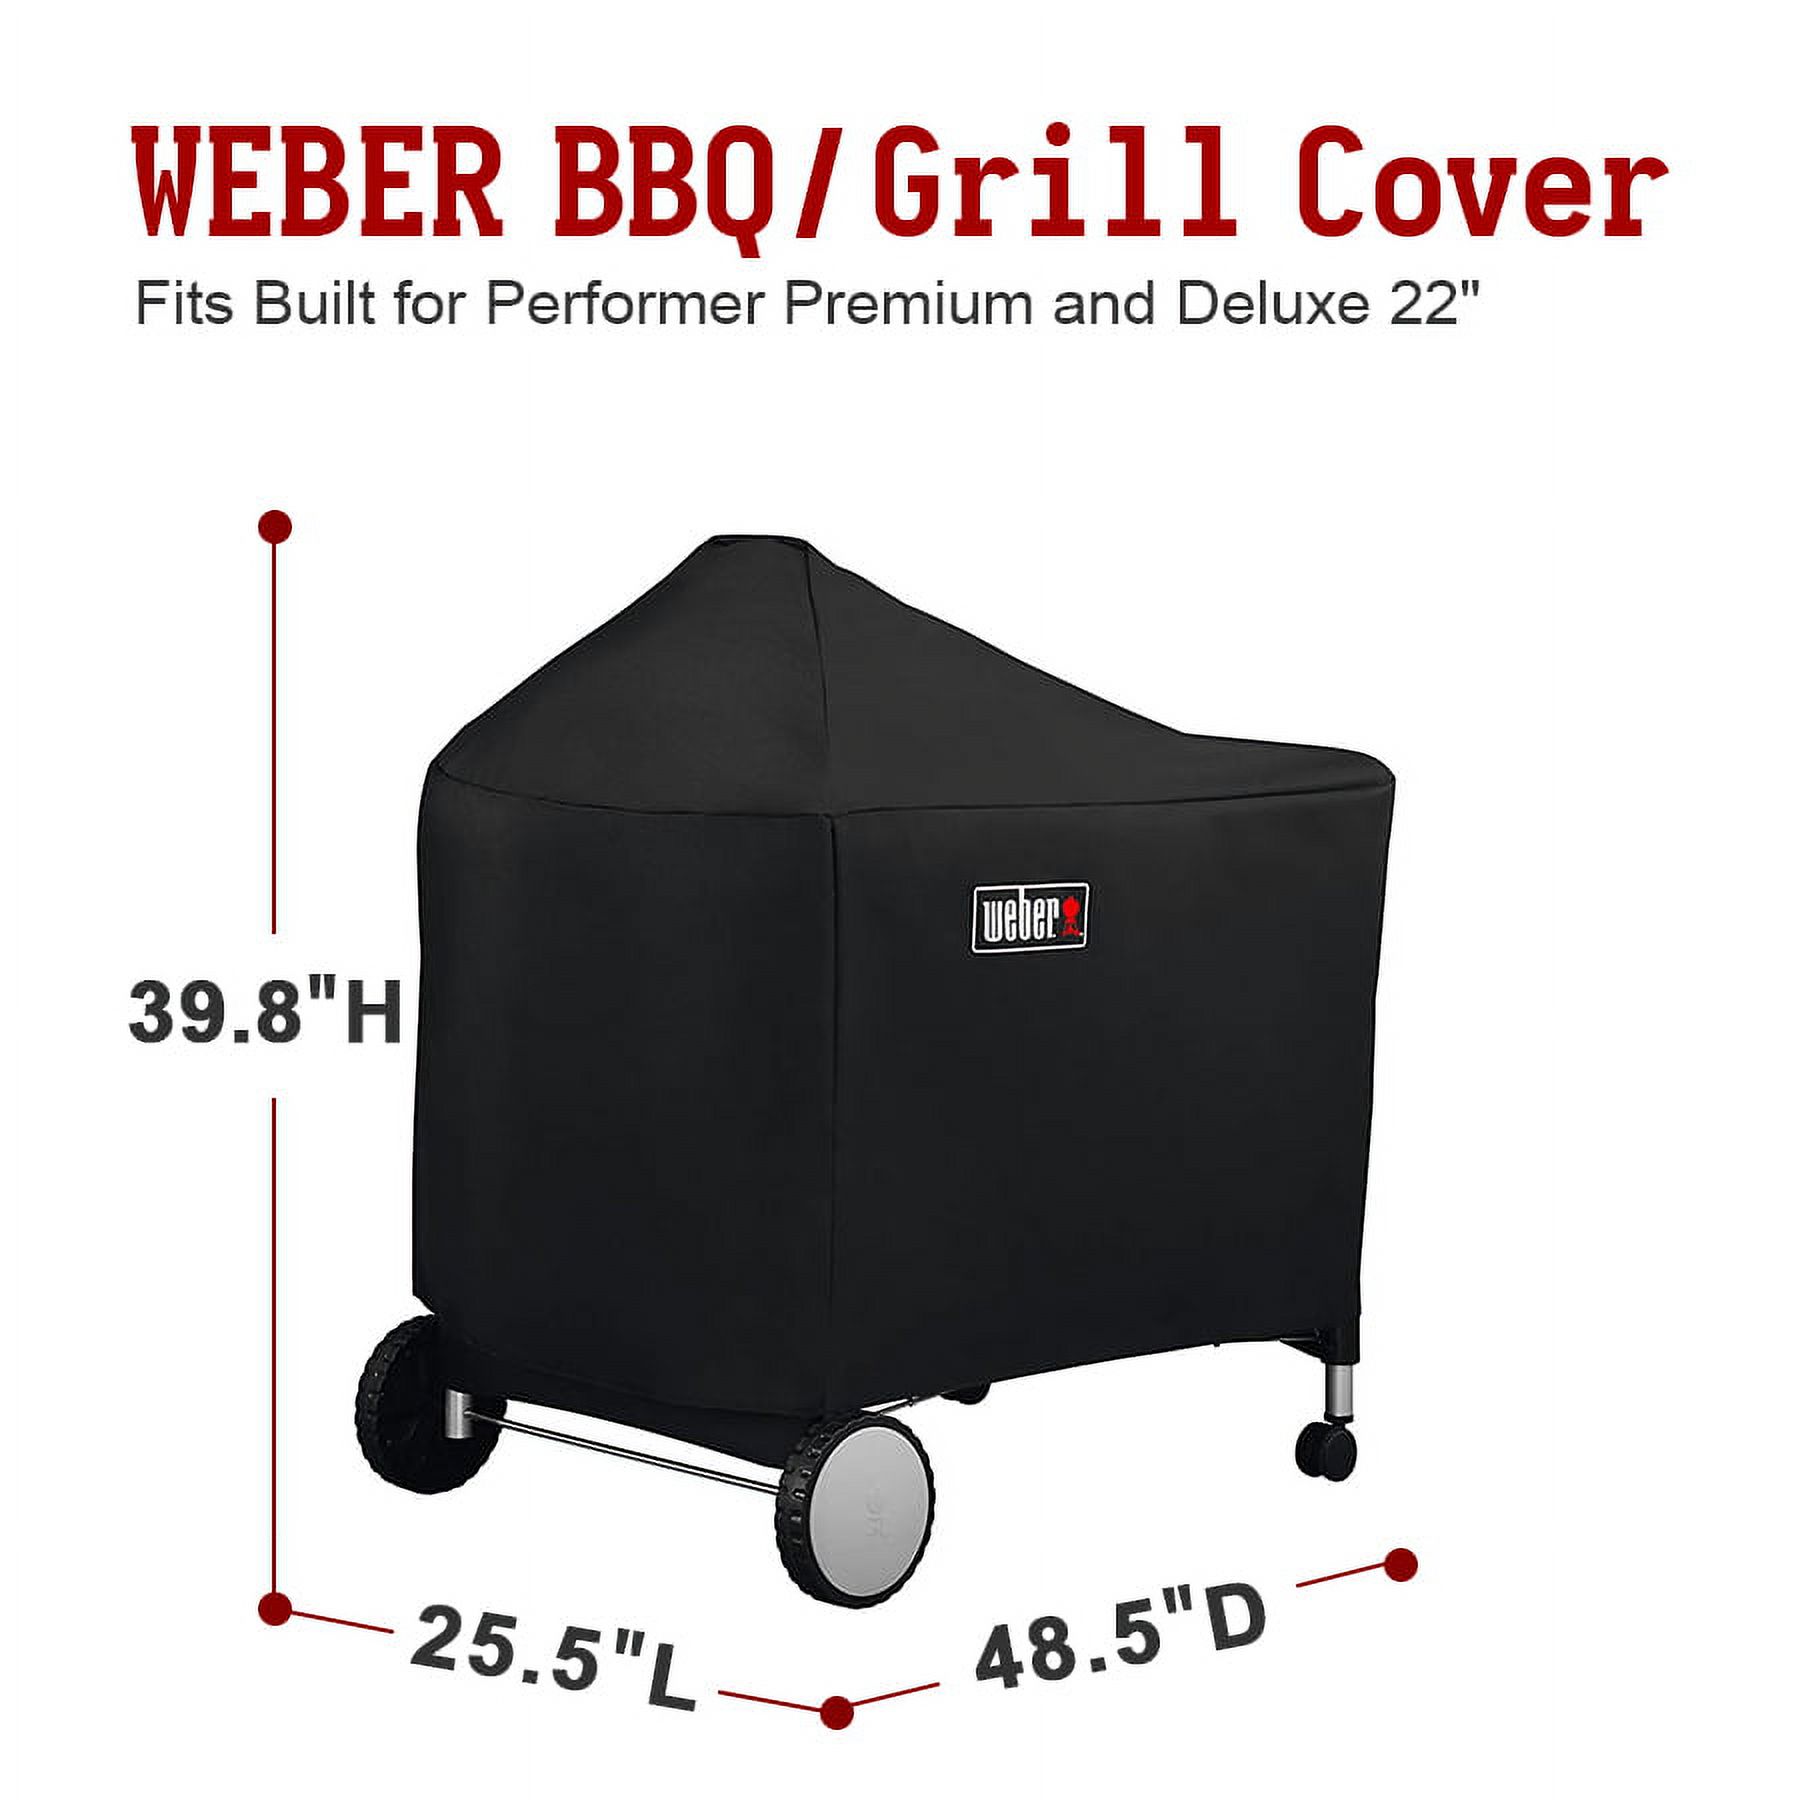 Weber 7152 Grill Cover for Performer Premium and Deluxe, for Weber Performer Charcoal Grills, 22 Inch(48.5 X 25.5 X 39.8 inches) - image 2 of 6